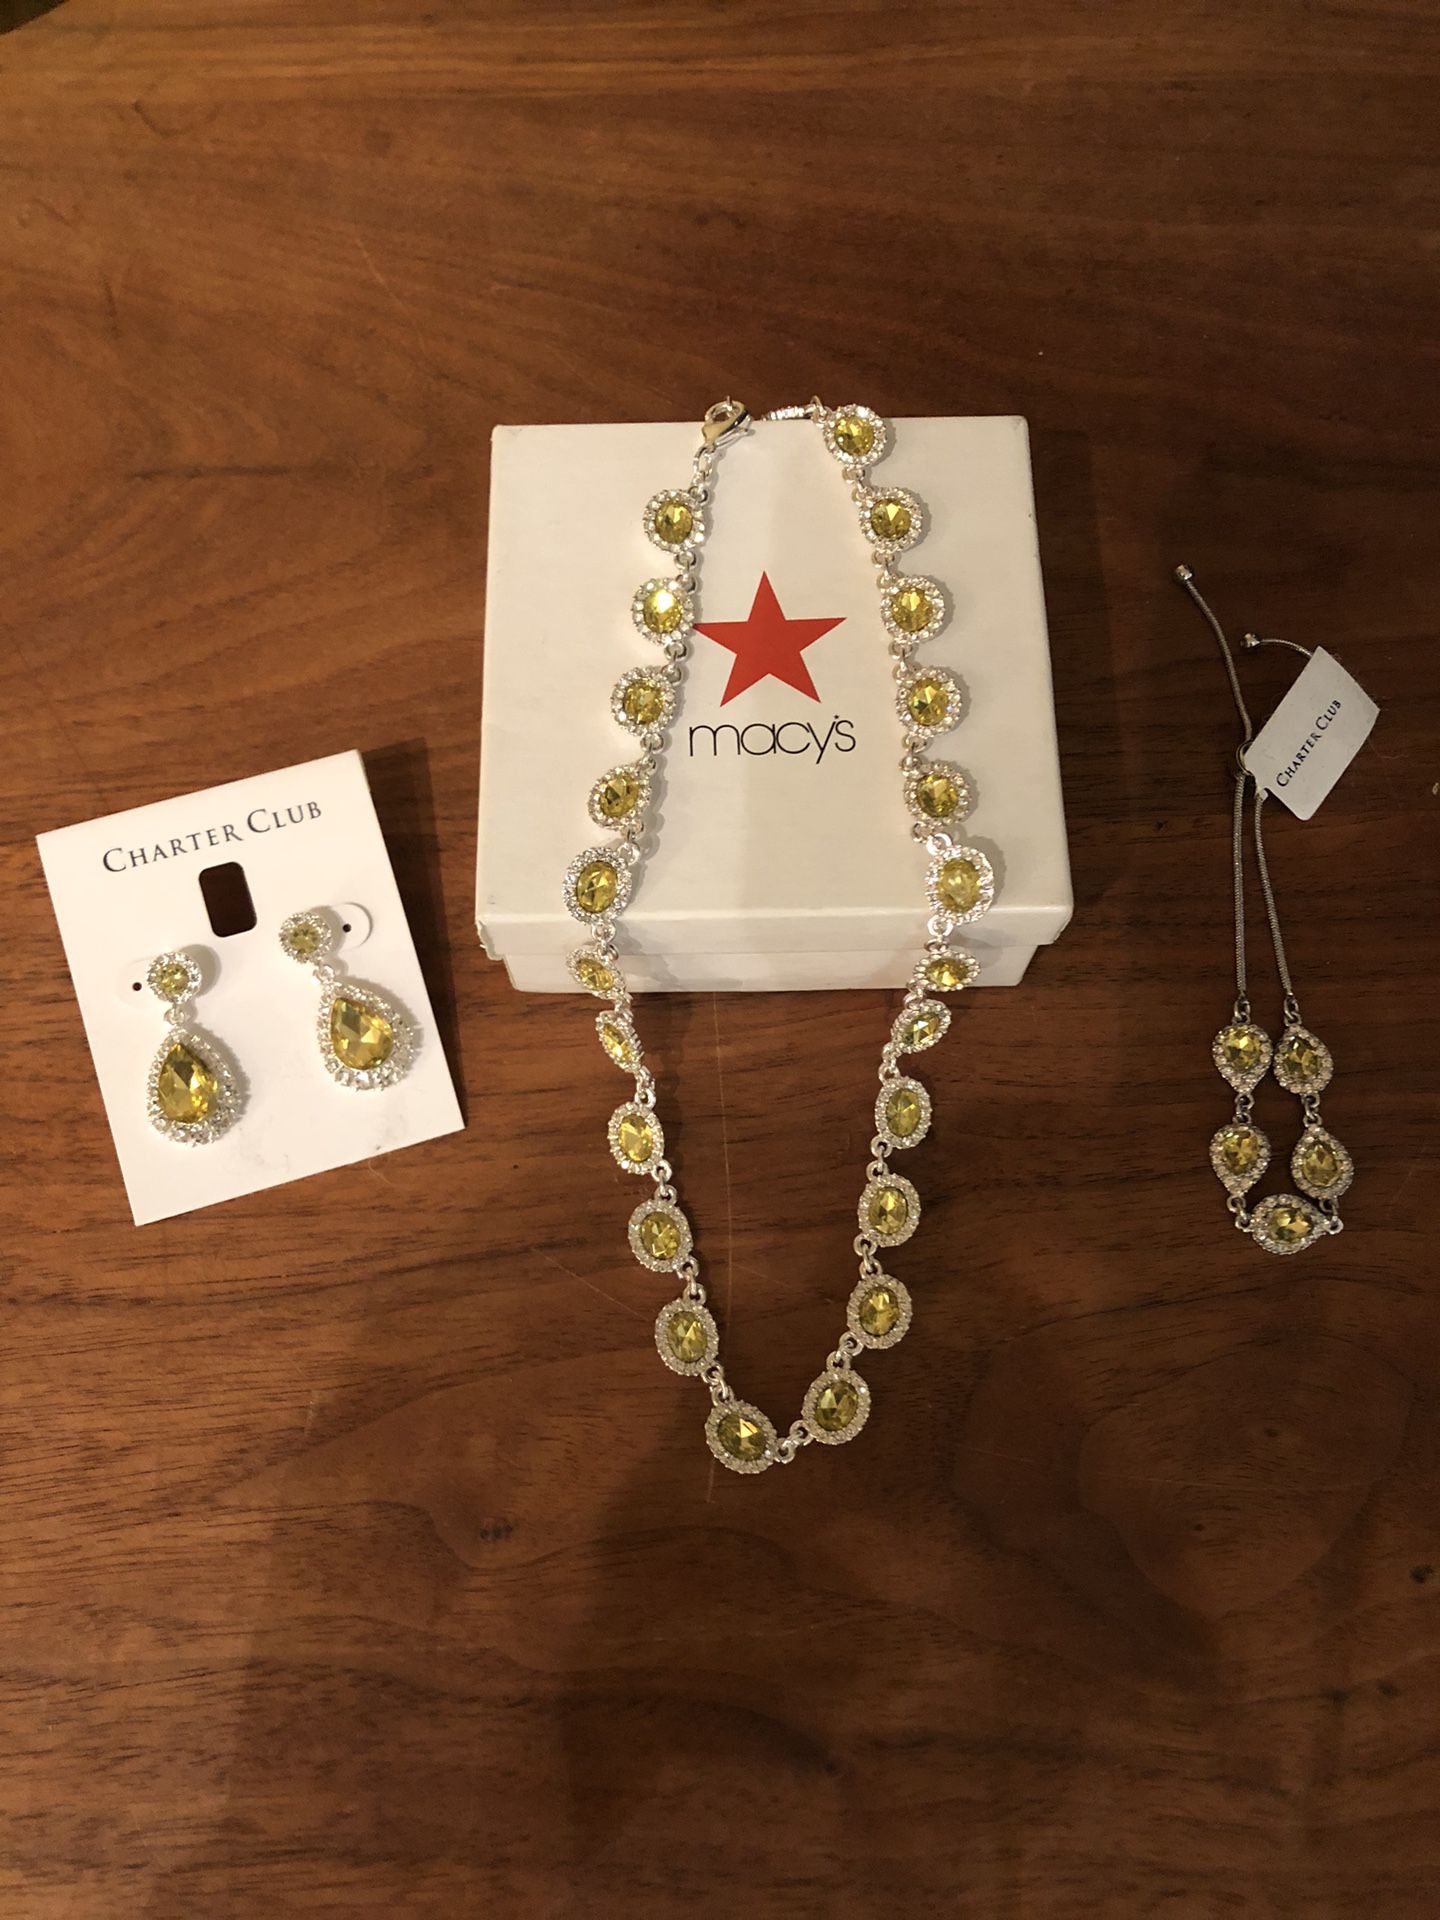 Charter Club Yellow Stone With Diamonds Necklace, Bracelet And Earrings 